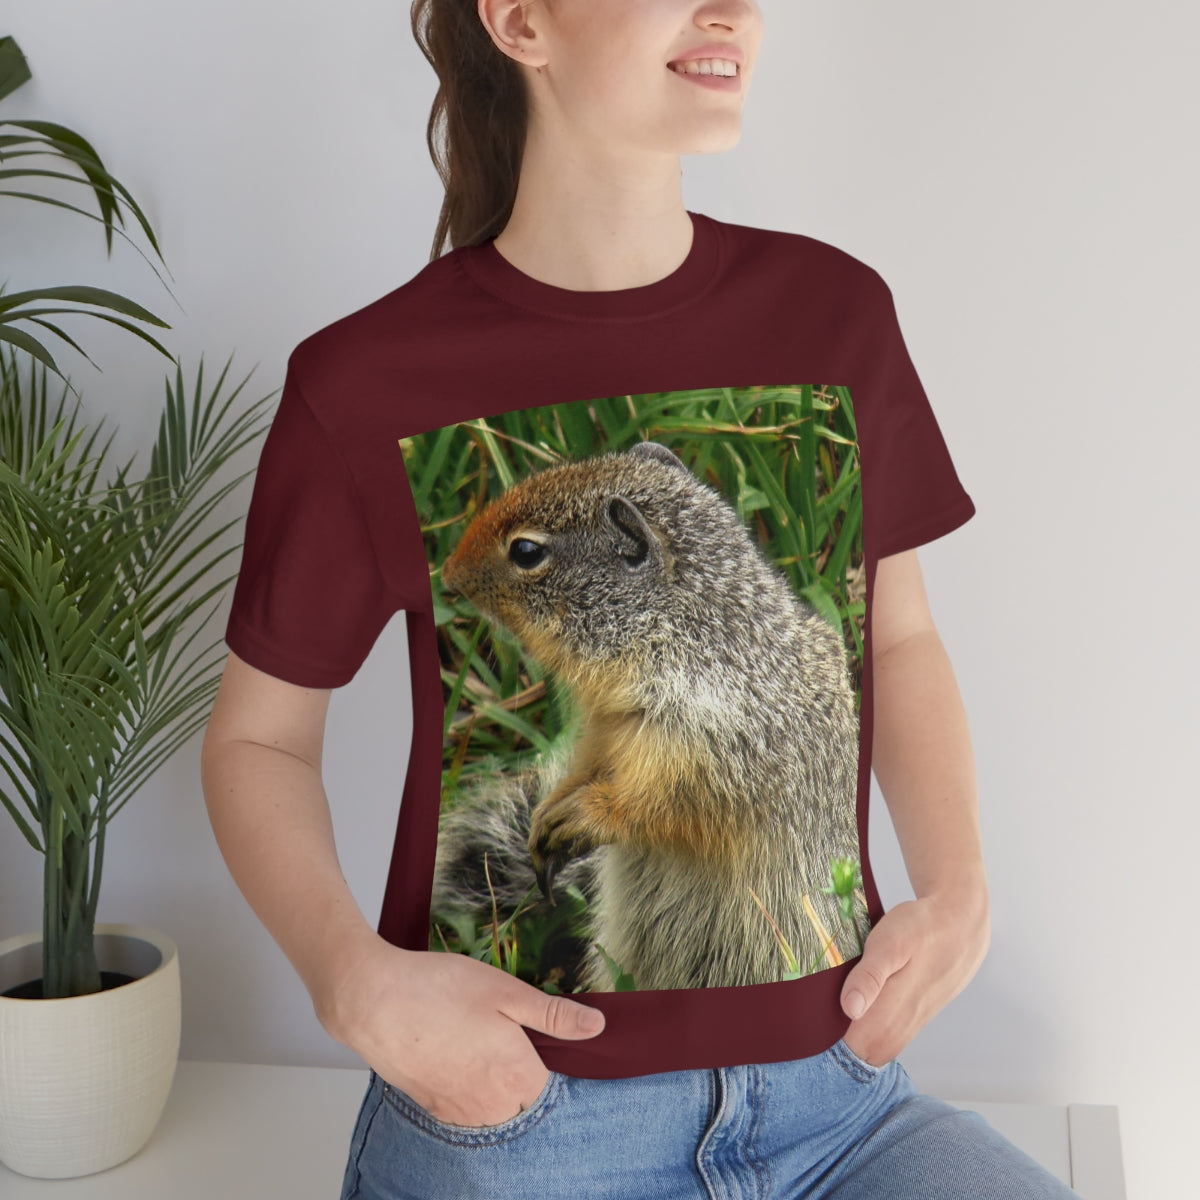 Inquisitive Stare - Unisex Jersey Short Sleeve T-Shirt - Fry1Productions